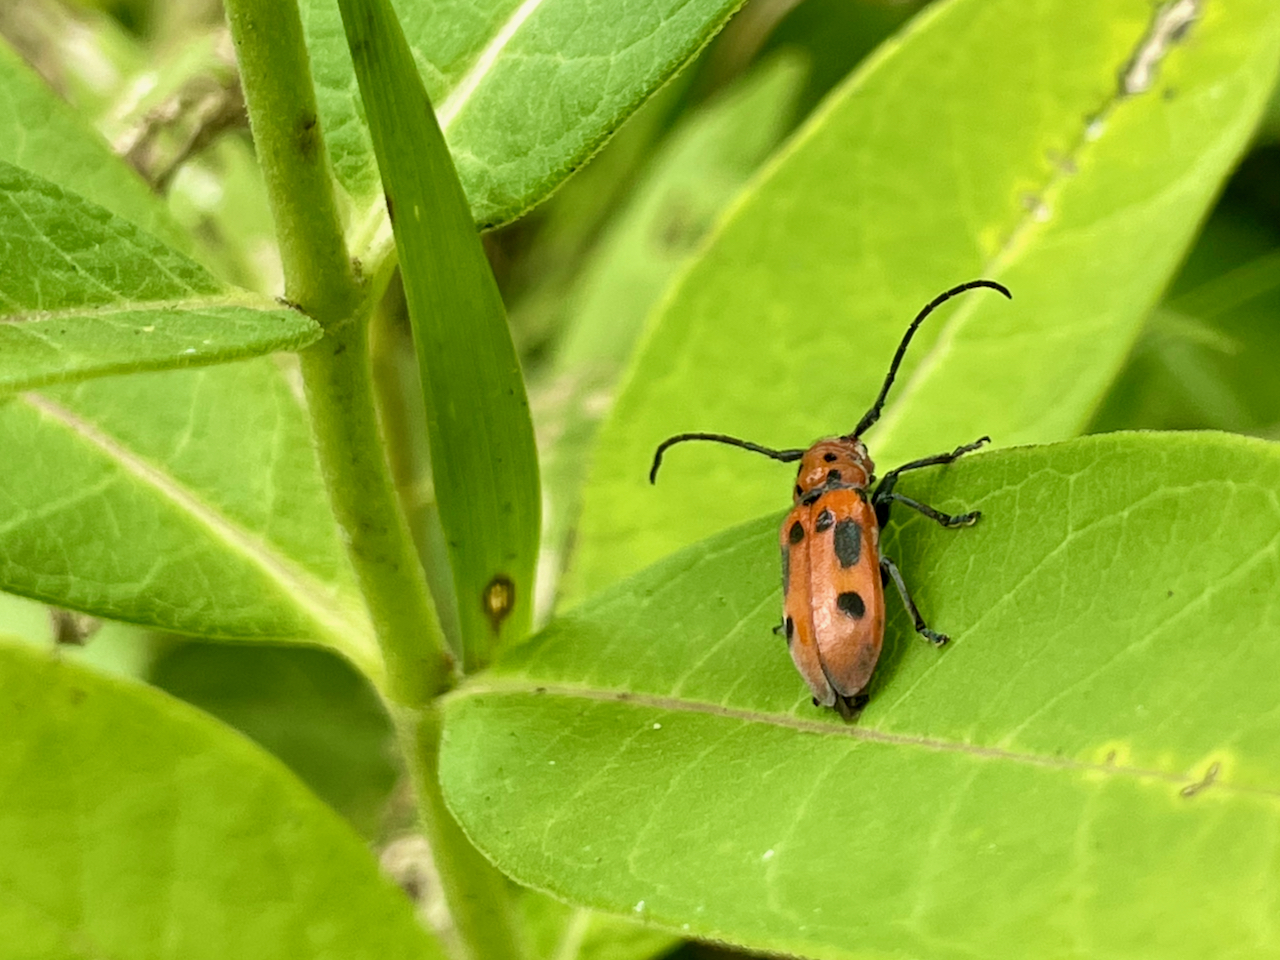 A red milkweed beetle on its host plant. CSUN evolutionary biologist Jeremy Yoder and a team of researchers have demonstrated that intimate interactions between insects and their host plants encourage the formation of new species. Photo courtesy of Jeremy Yoder.